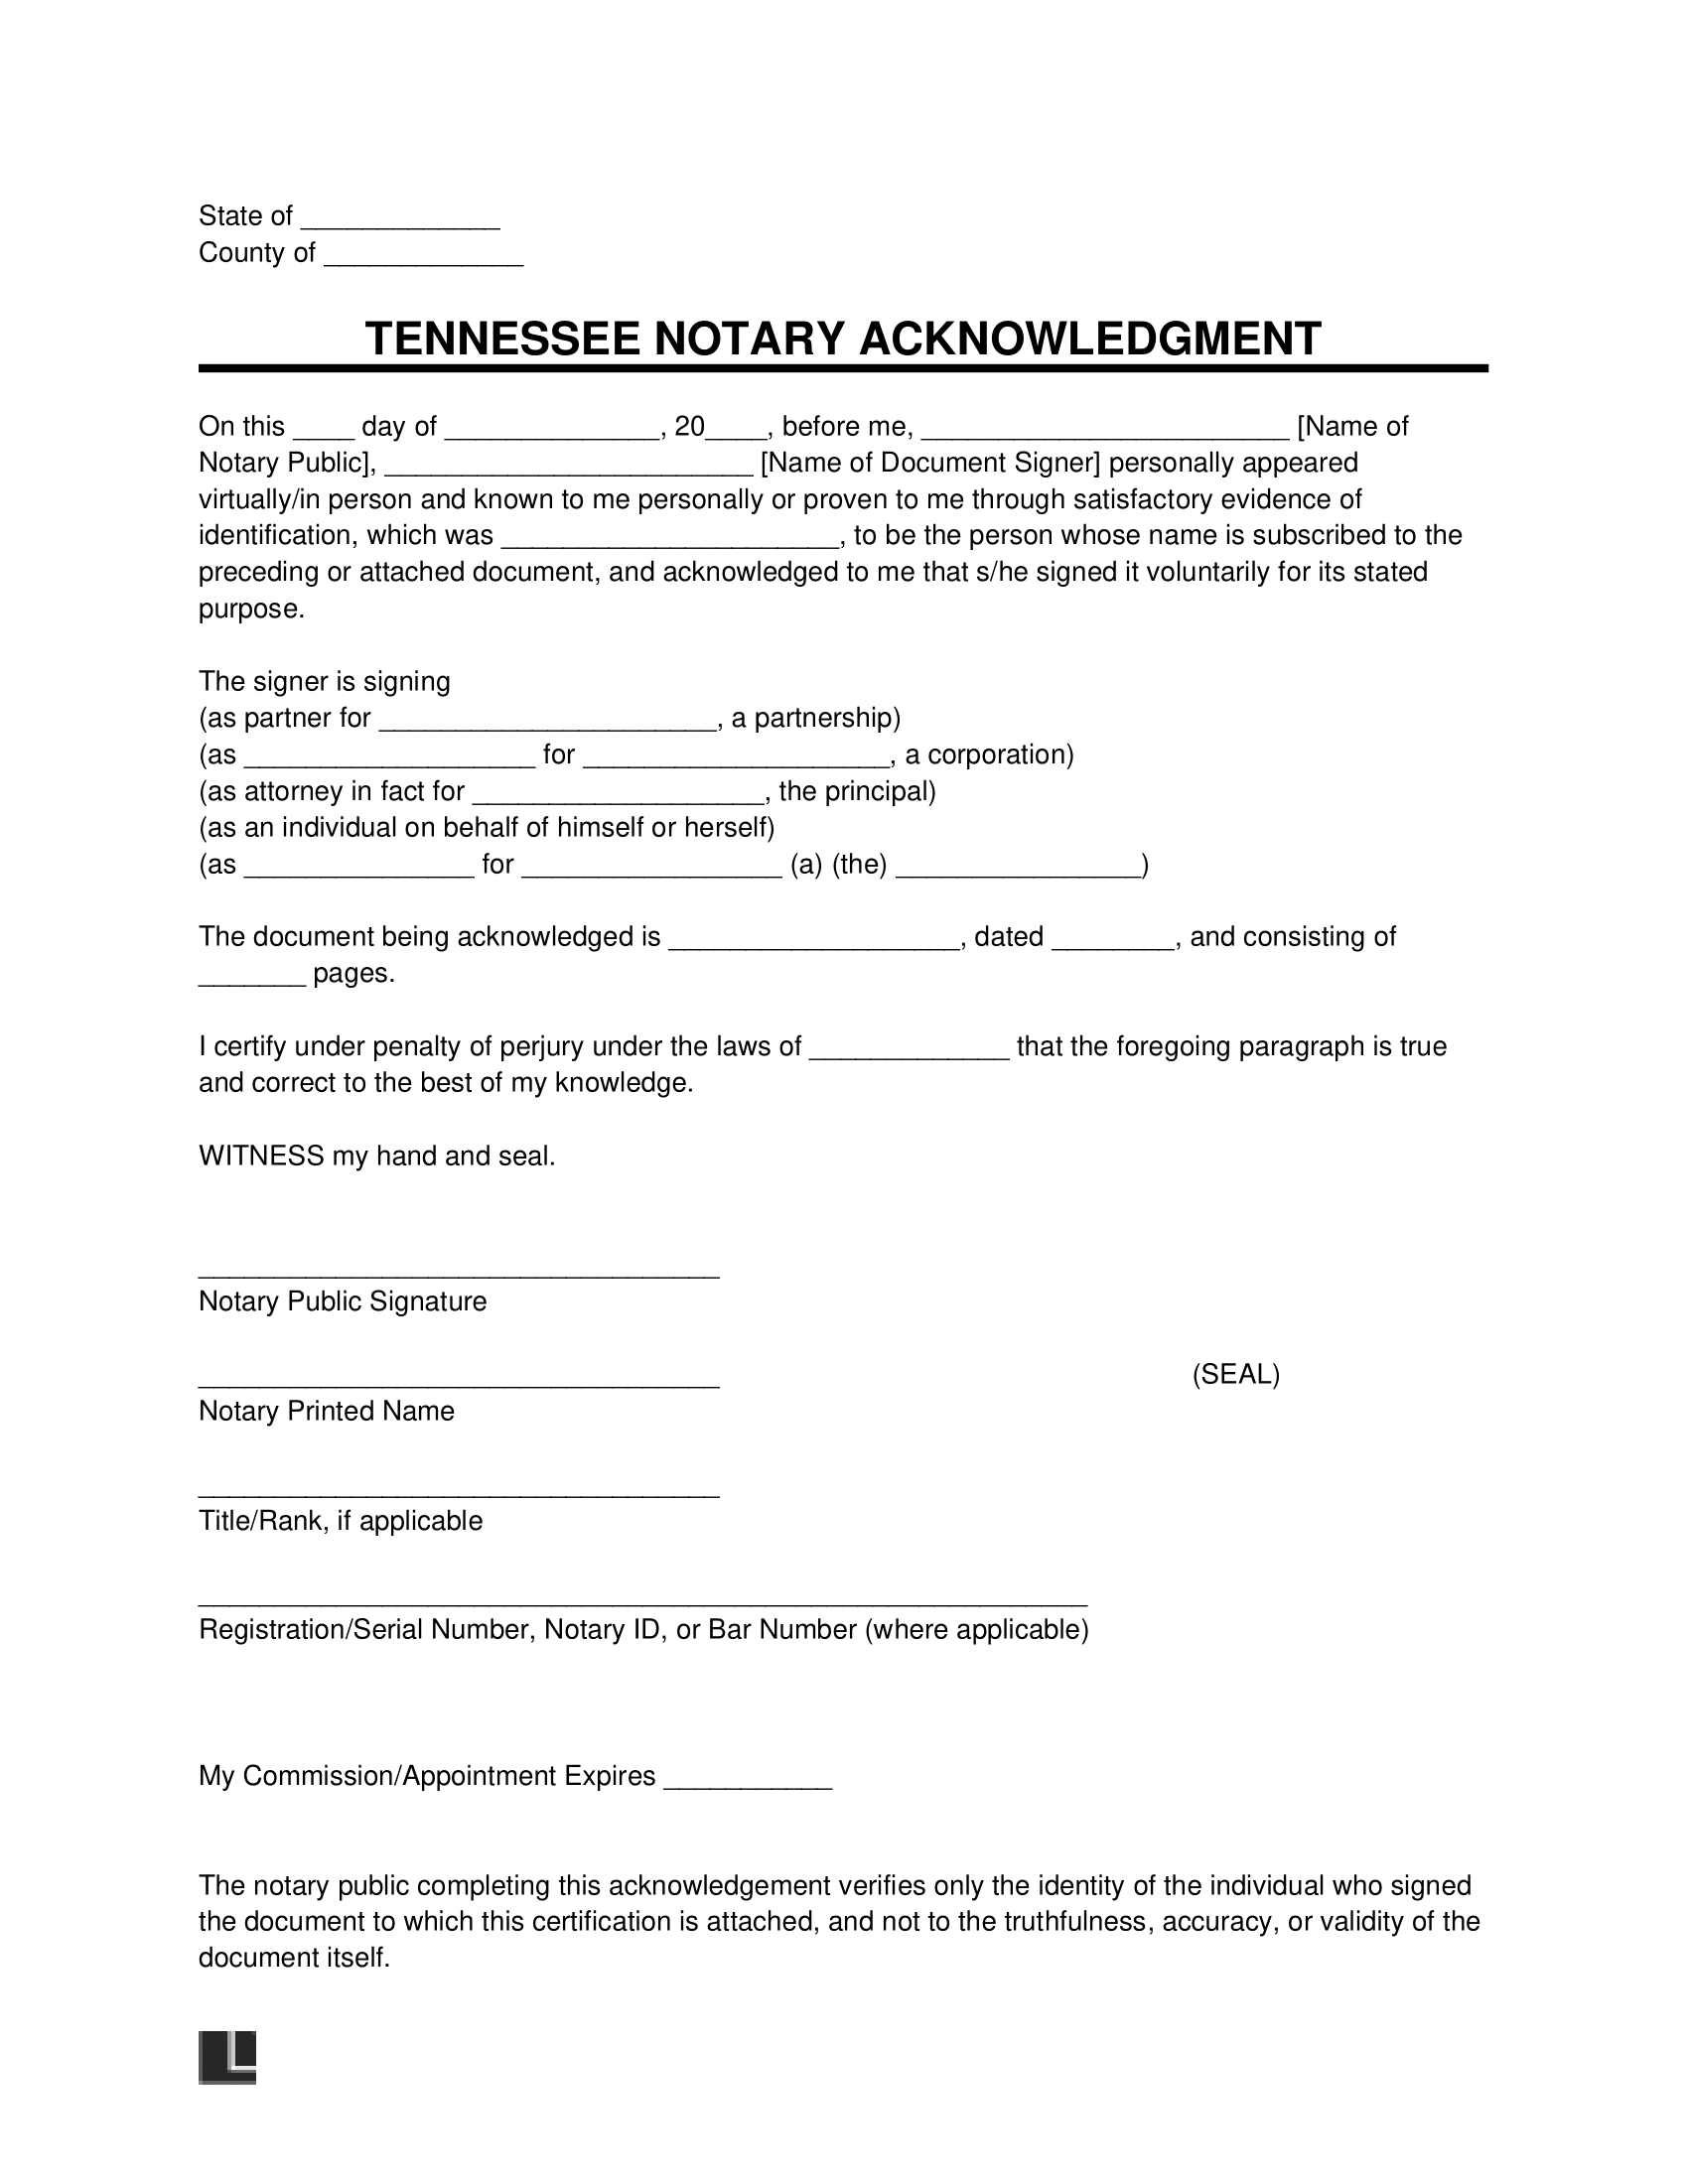 Tennessee Notary Acknowledgment Form